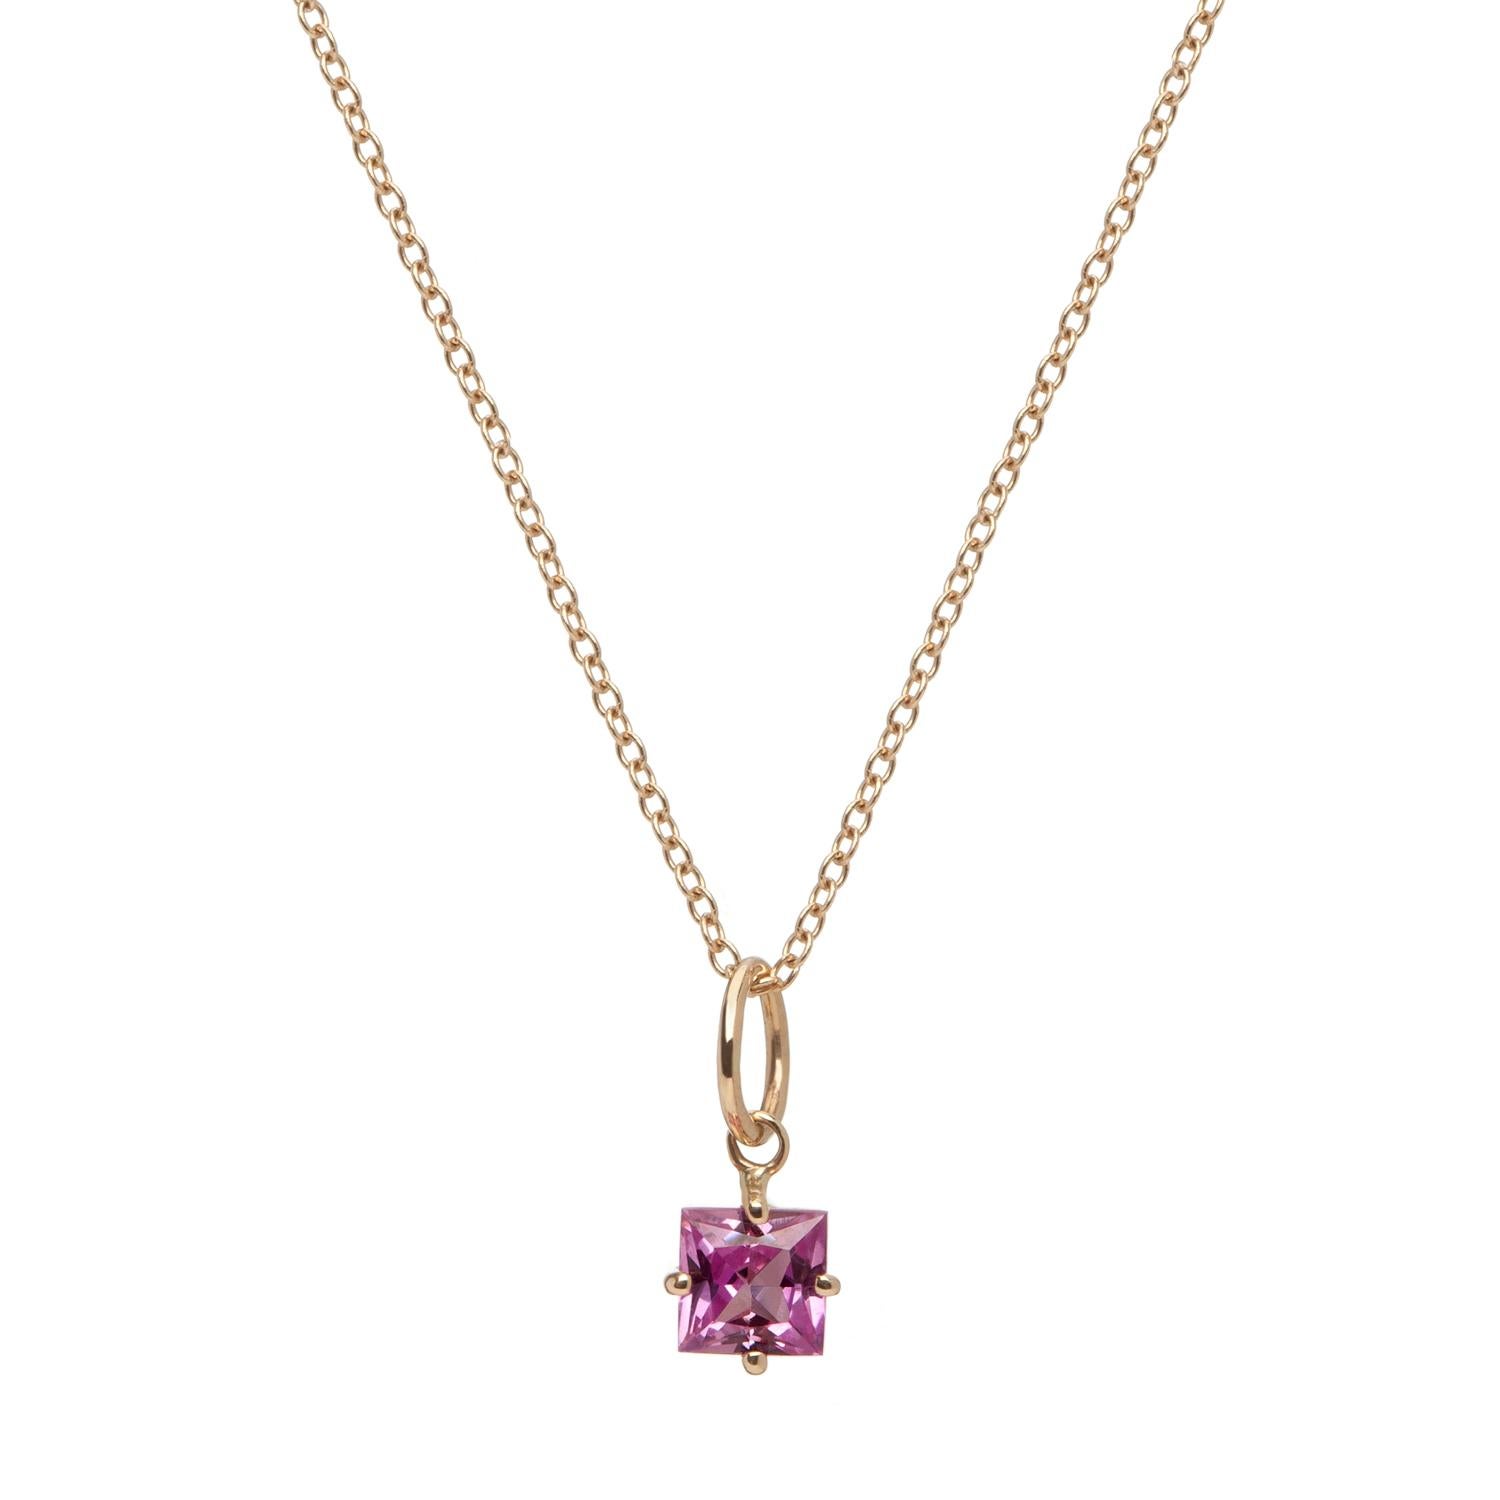 Princess cut pink sapphire charm pendant with prong setting. Great to wear on its own or add more charms from our collection to create your own personalized charm necklace.

Inspired by seeing the cross-section view of life, as if slicing a tree to